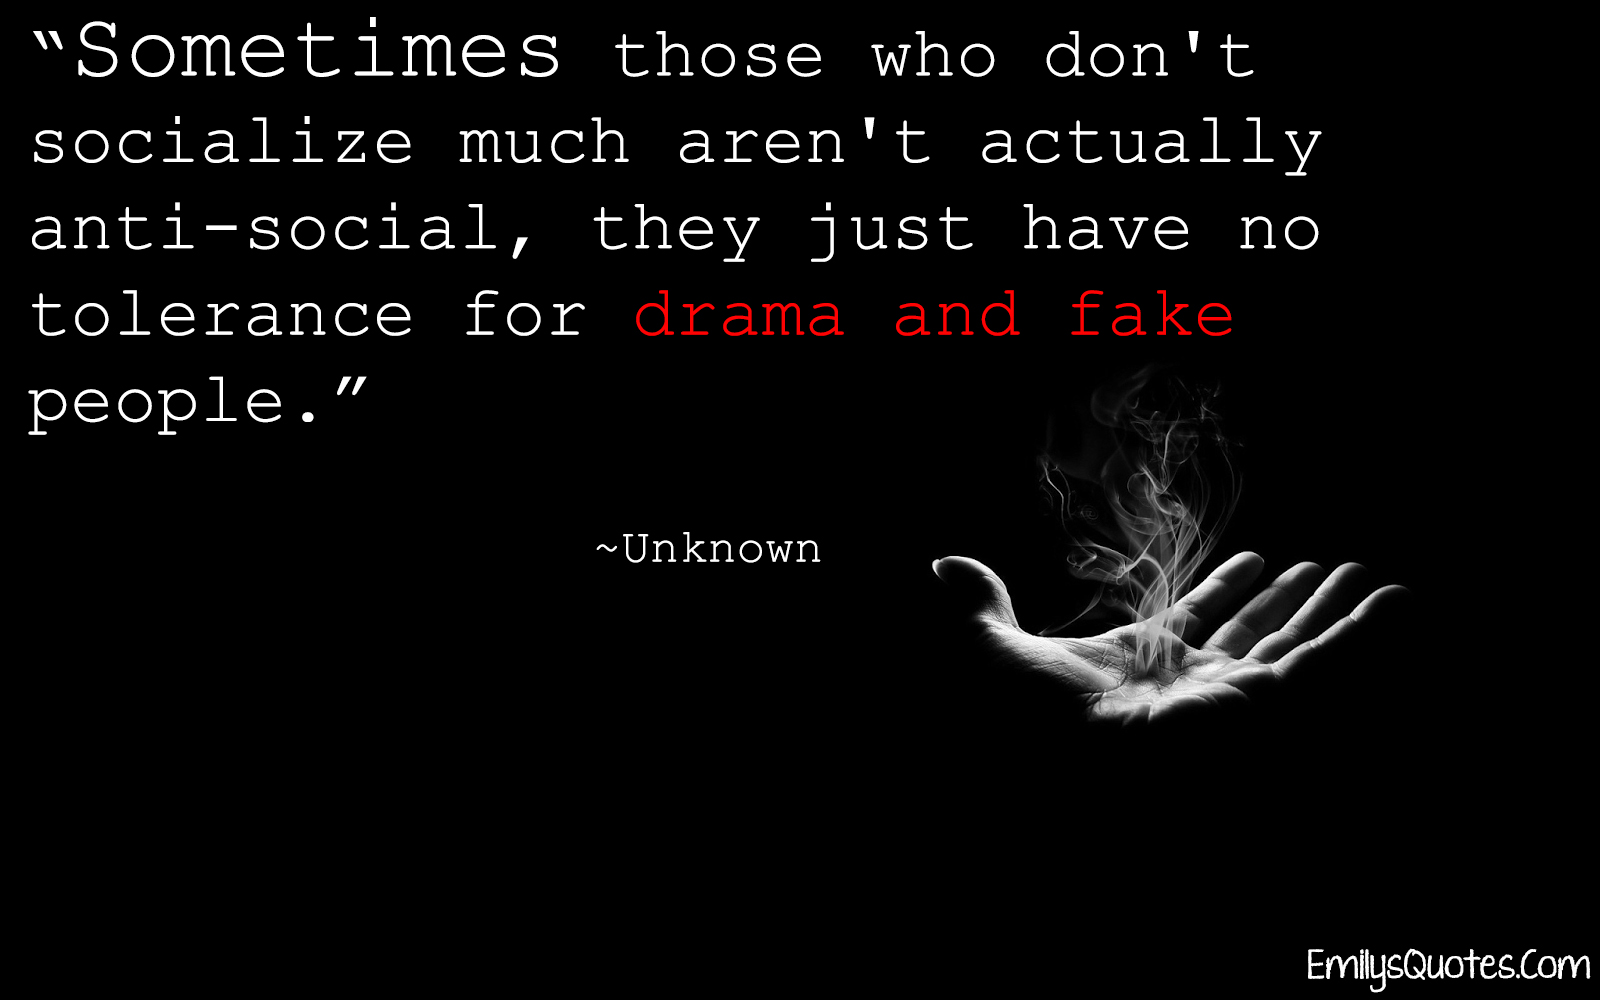 Sometimes those who don’t socialize much aren’t actually anti-social, they just have no tolerance for drama and fake people